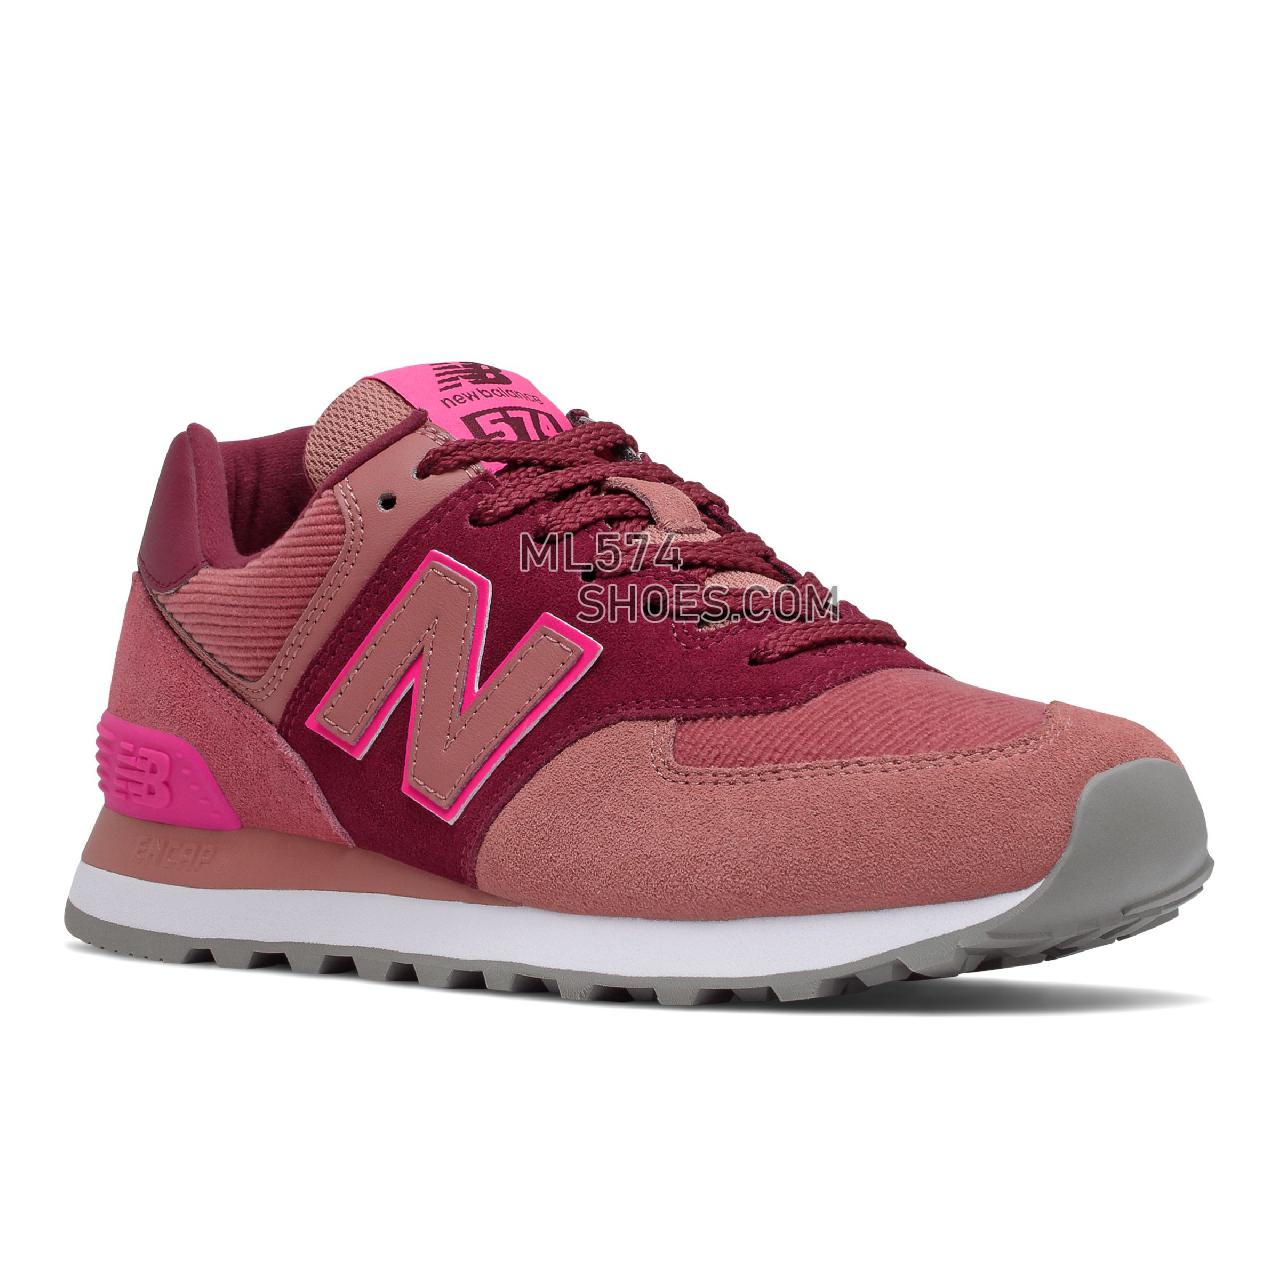 New Balance 574 - Women's Classic Sneakers - Garnet with Washed Henna - WL574WH2